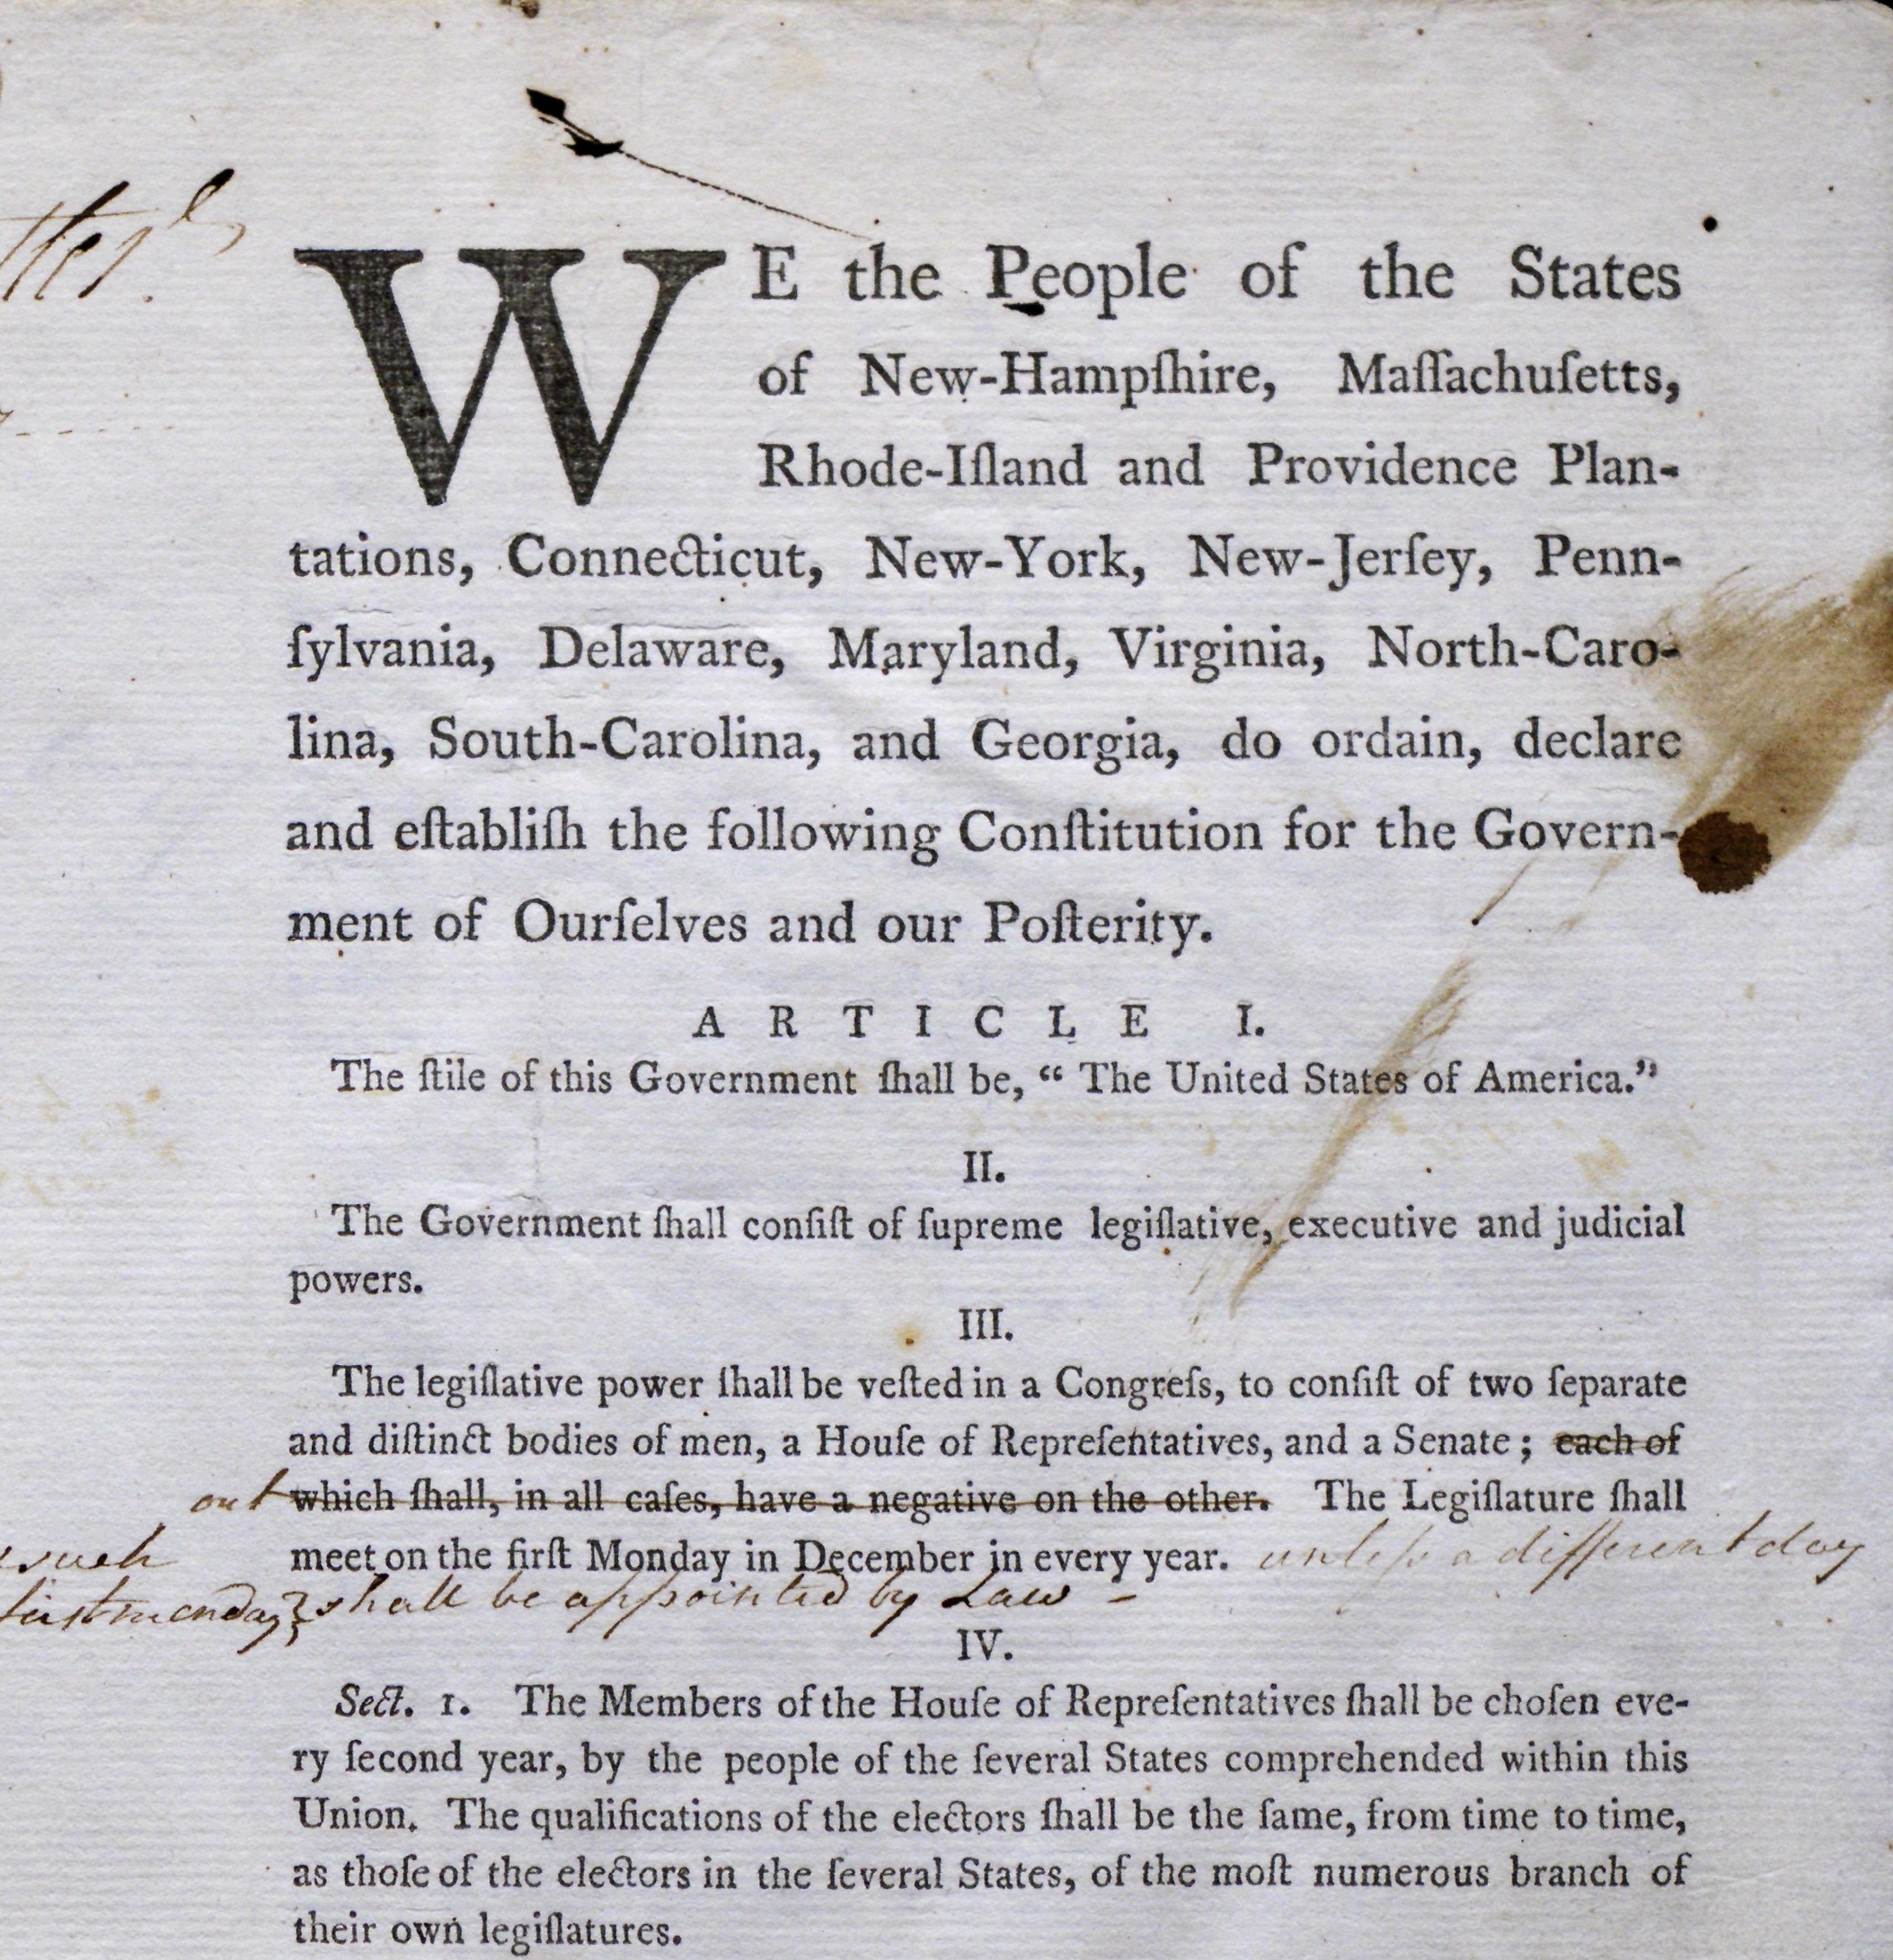 First printed draft of the US Constitution, August 6, 1787. (Gilder Lehrman Institute)